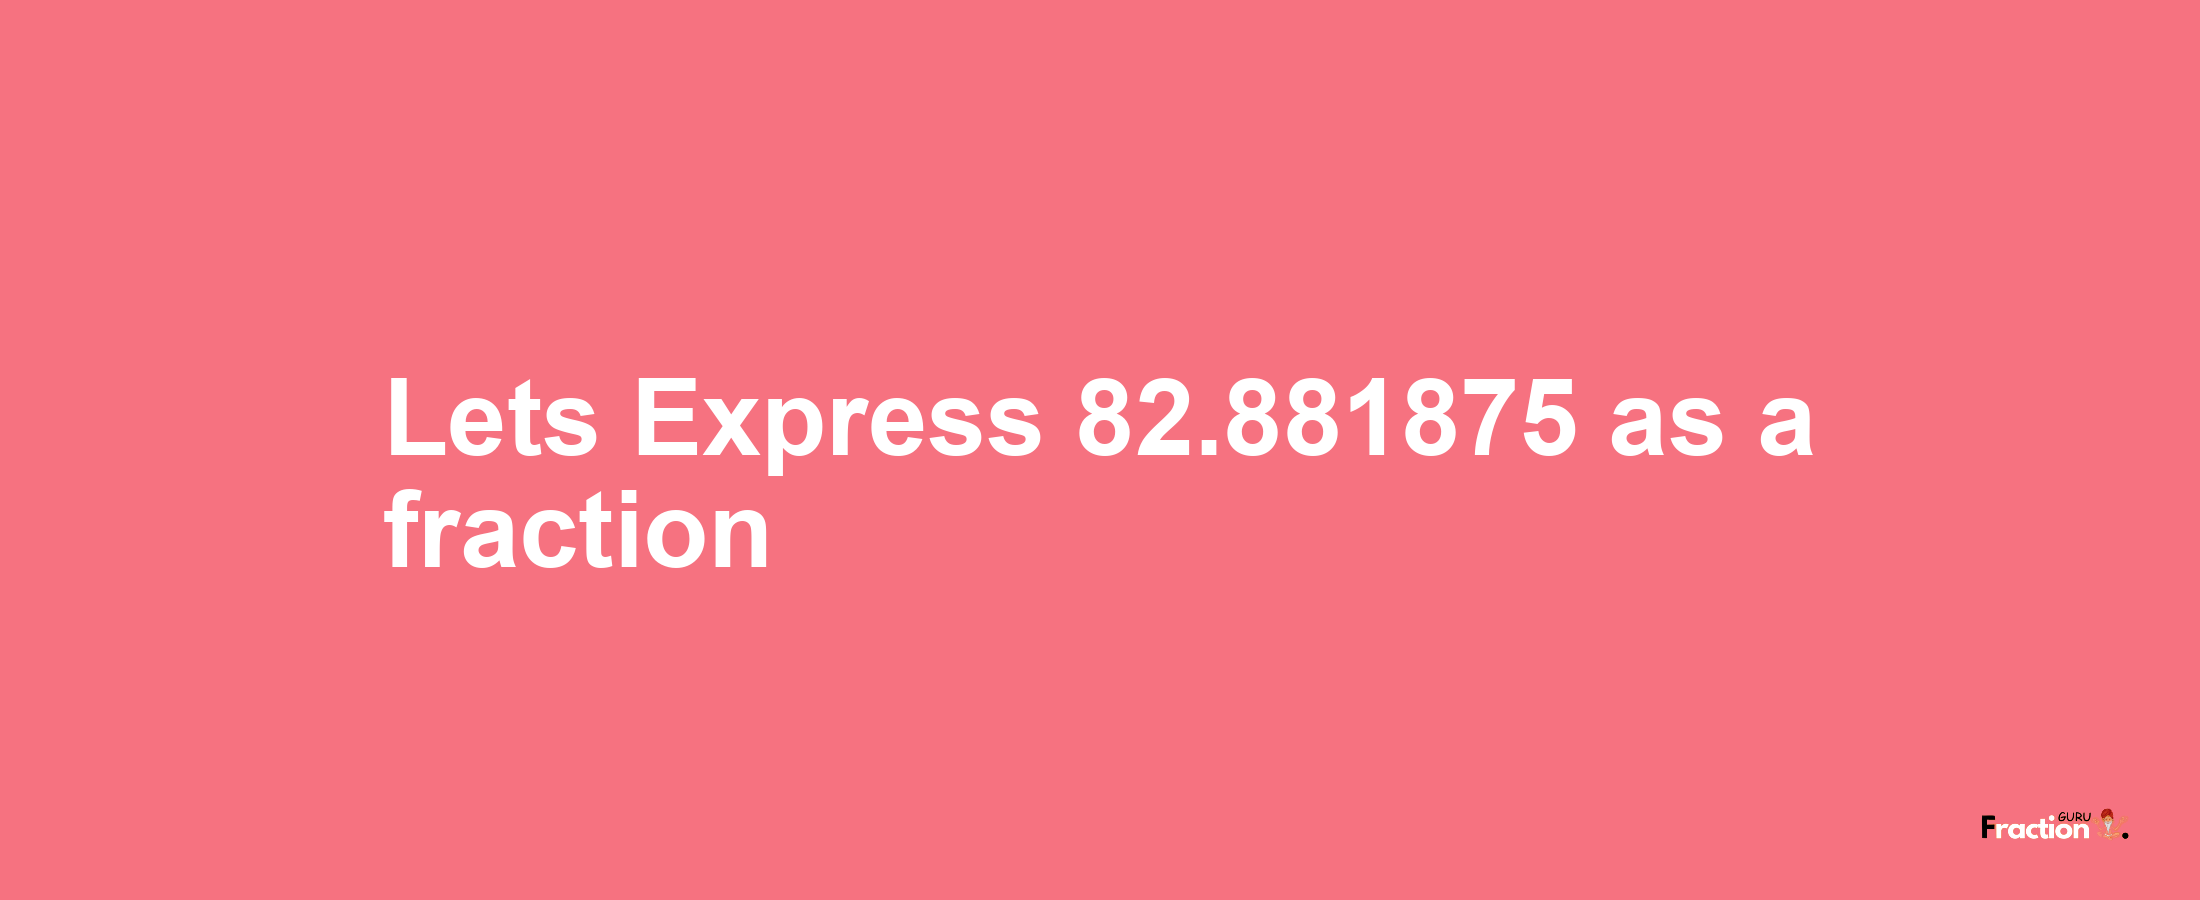 Lets Express 82.881875 as afraction